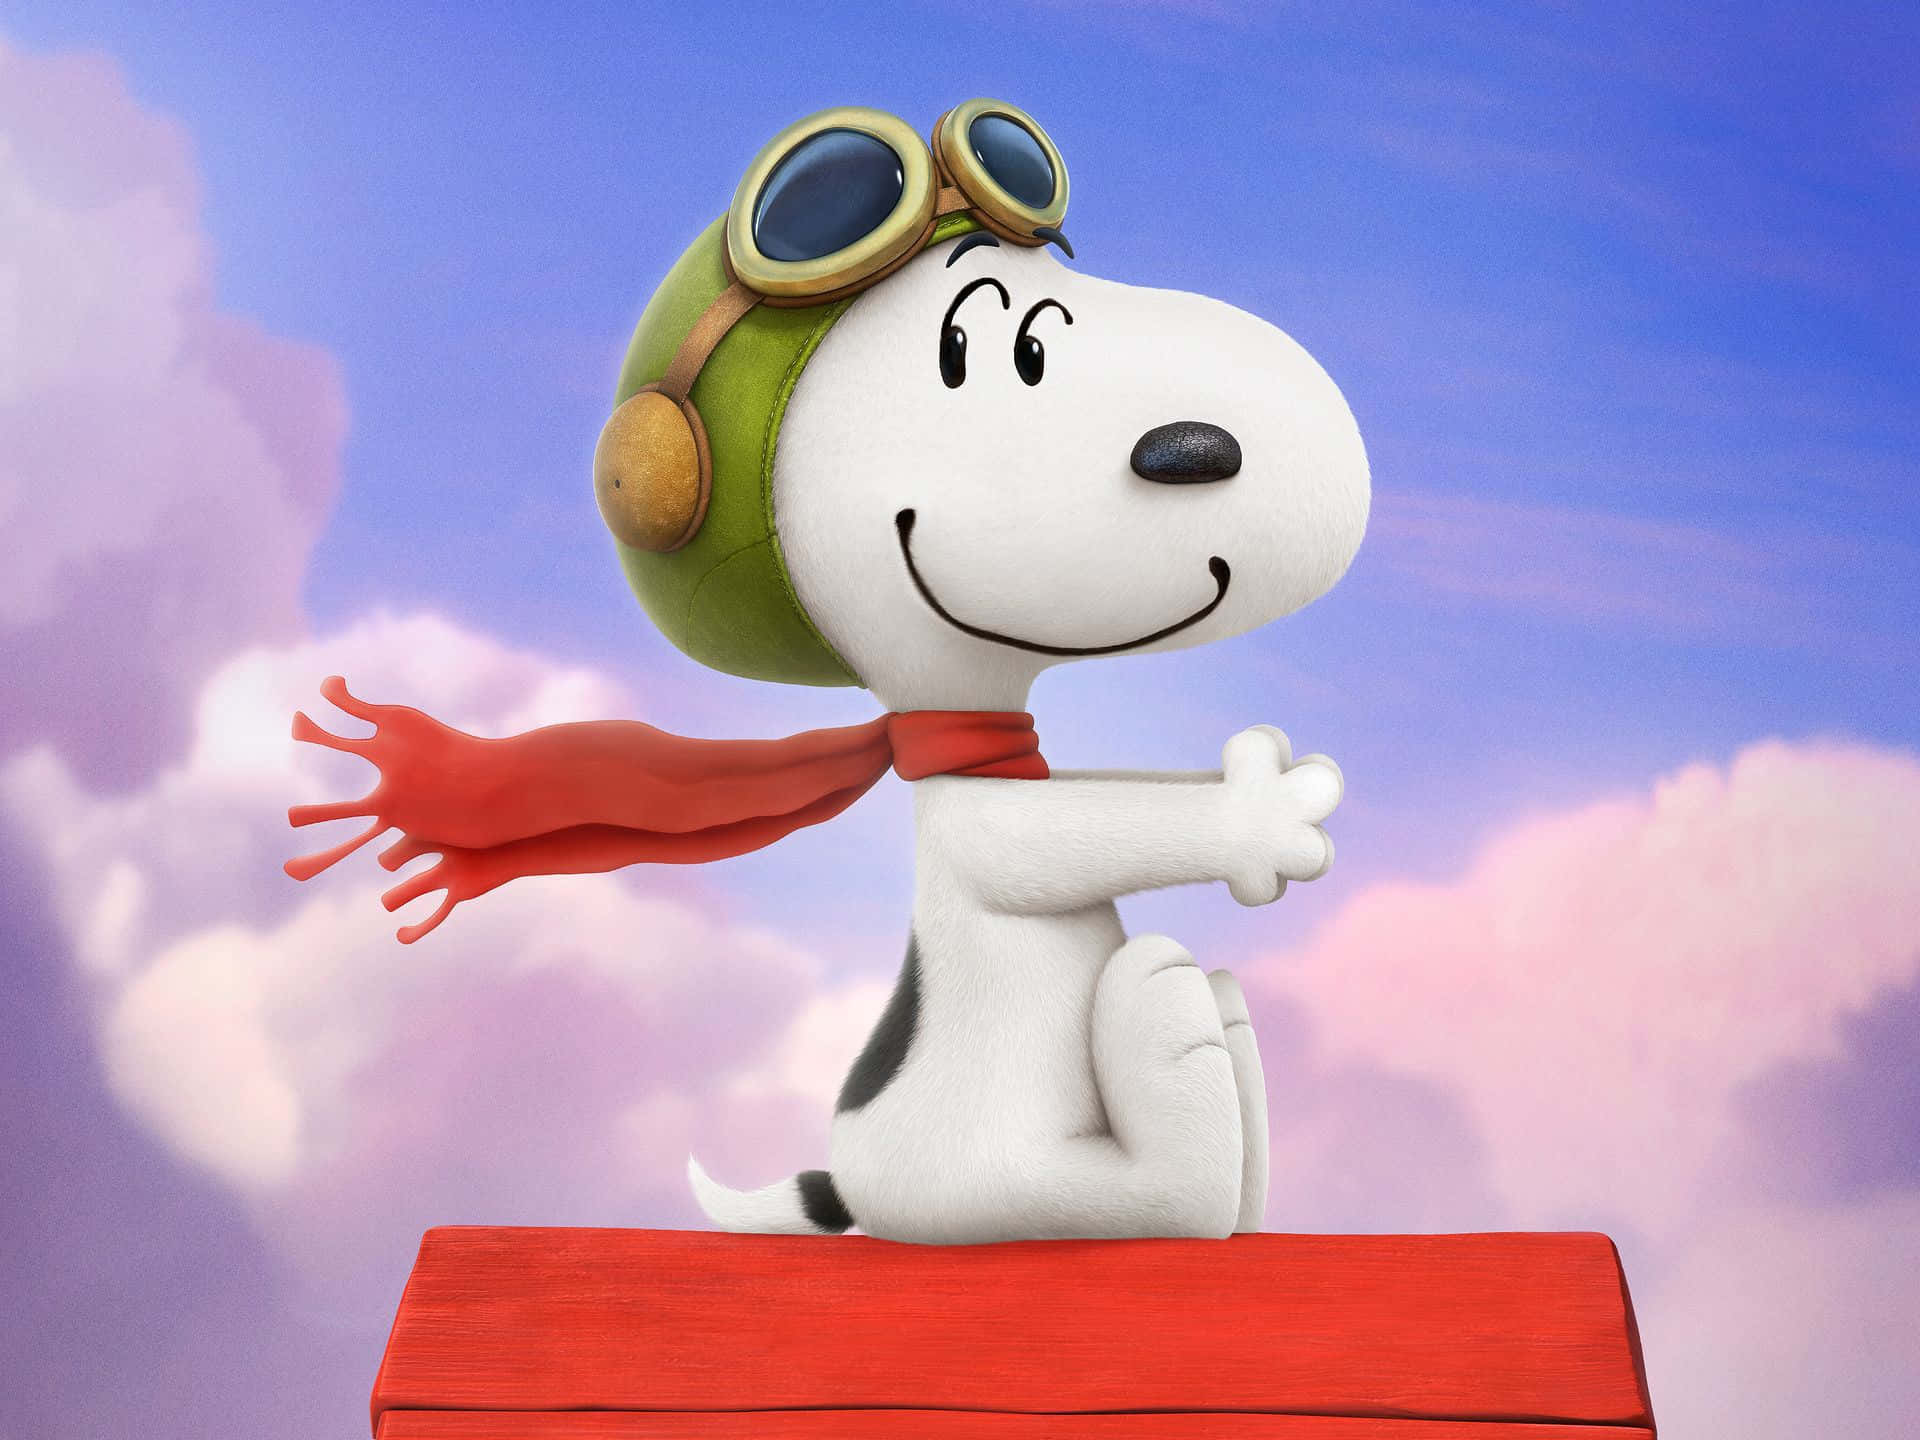 "Snoopy living his best life!"